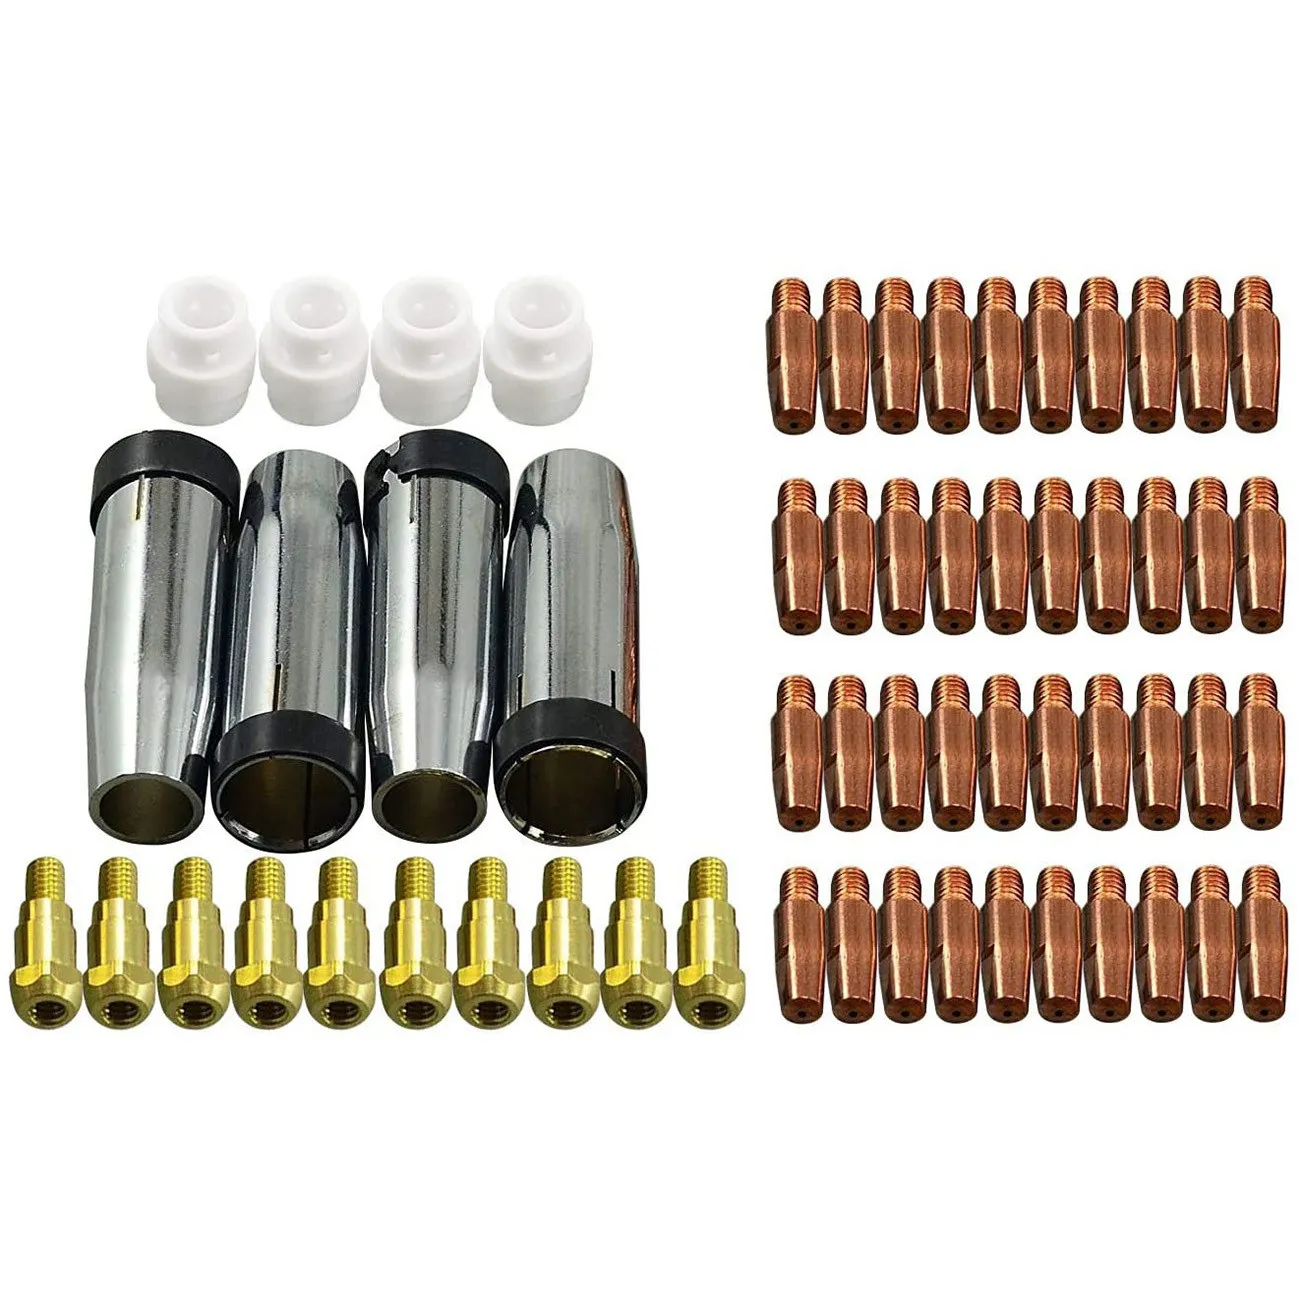 

Contact Tip Conical Gas Nozzle Tip Holder & 24KD MB24 MIG MAG Welding Torch 59Pcs